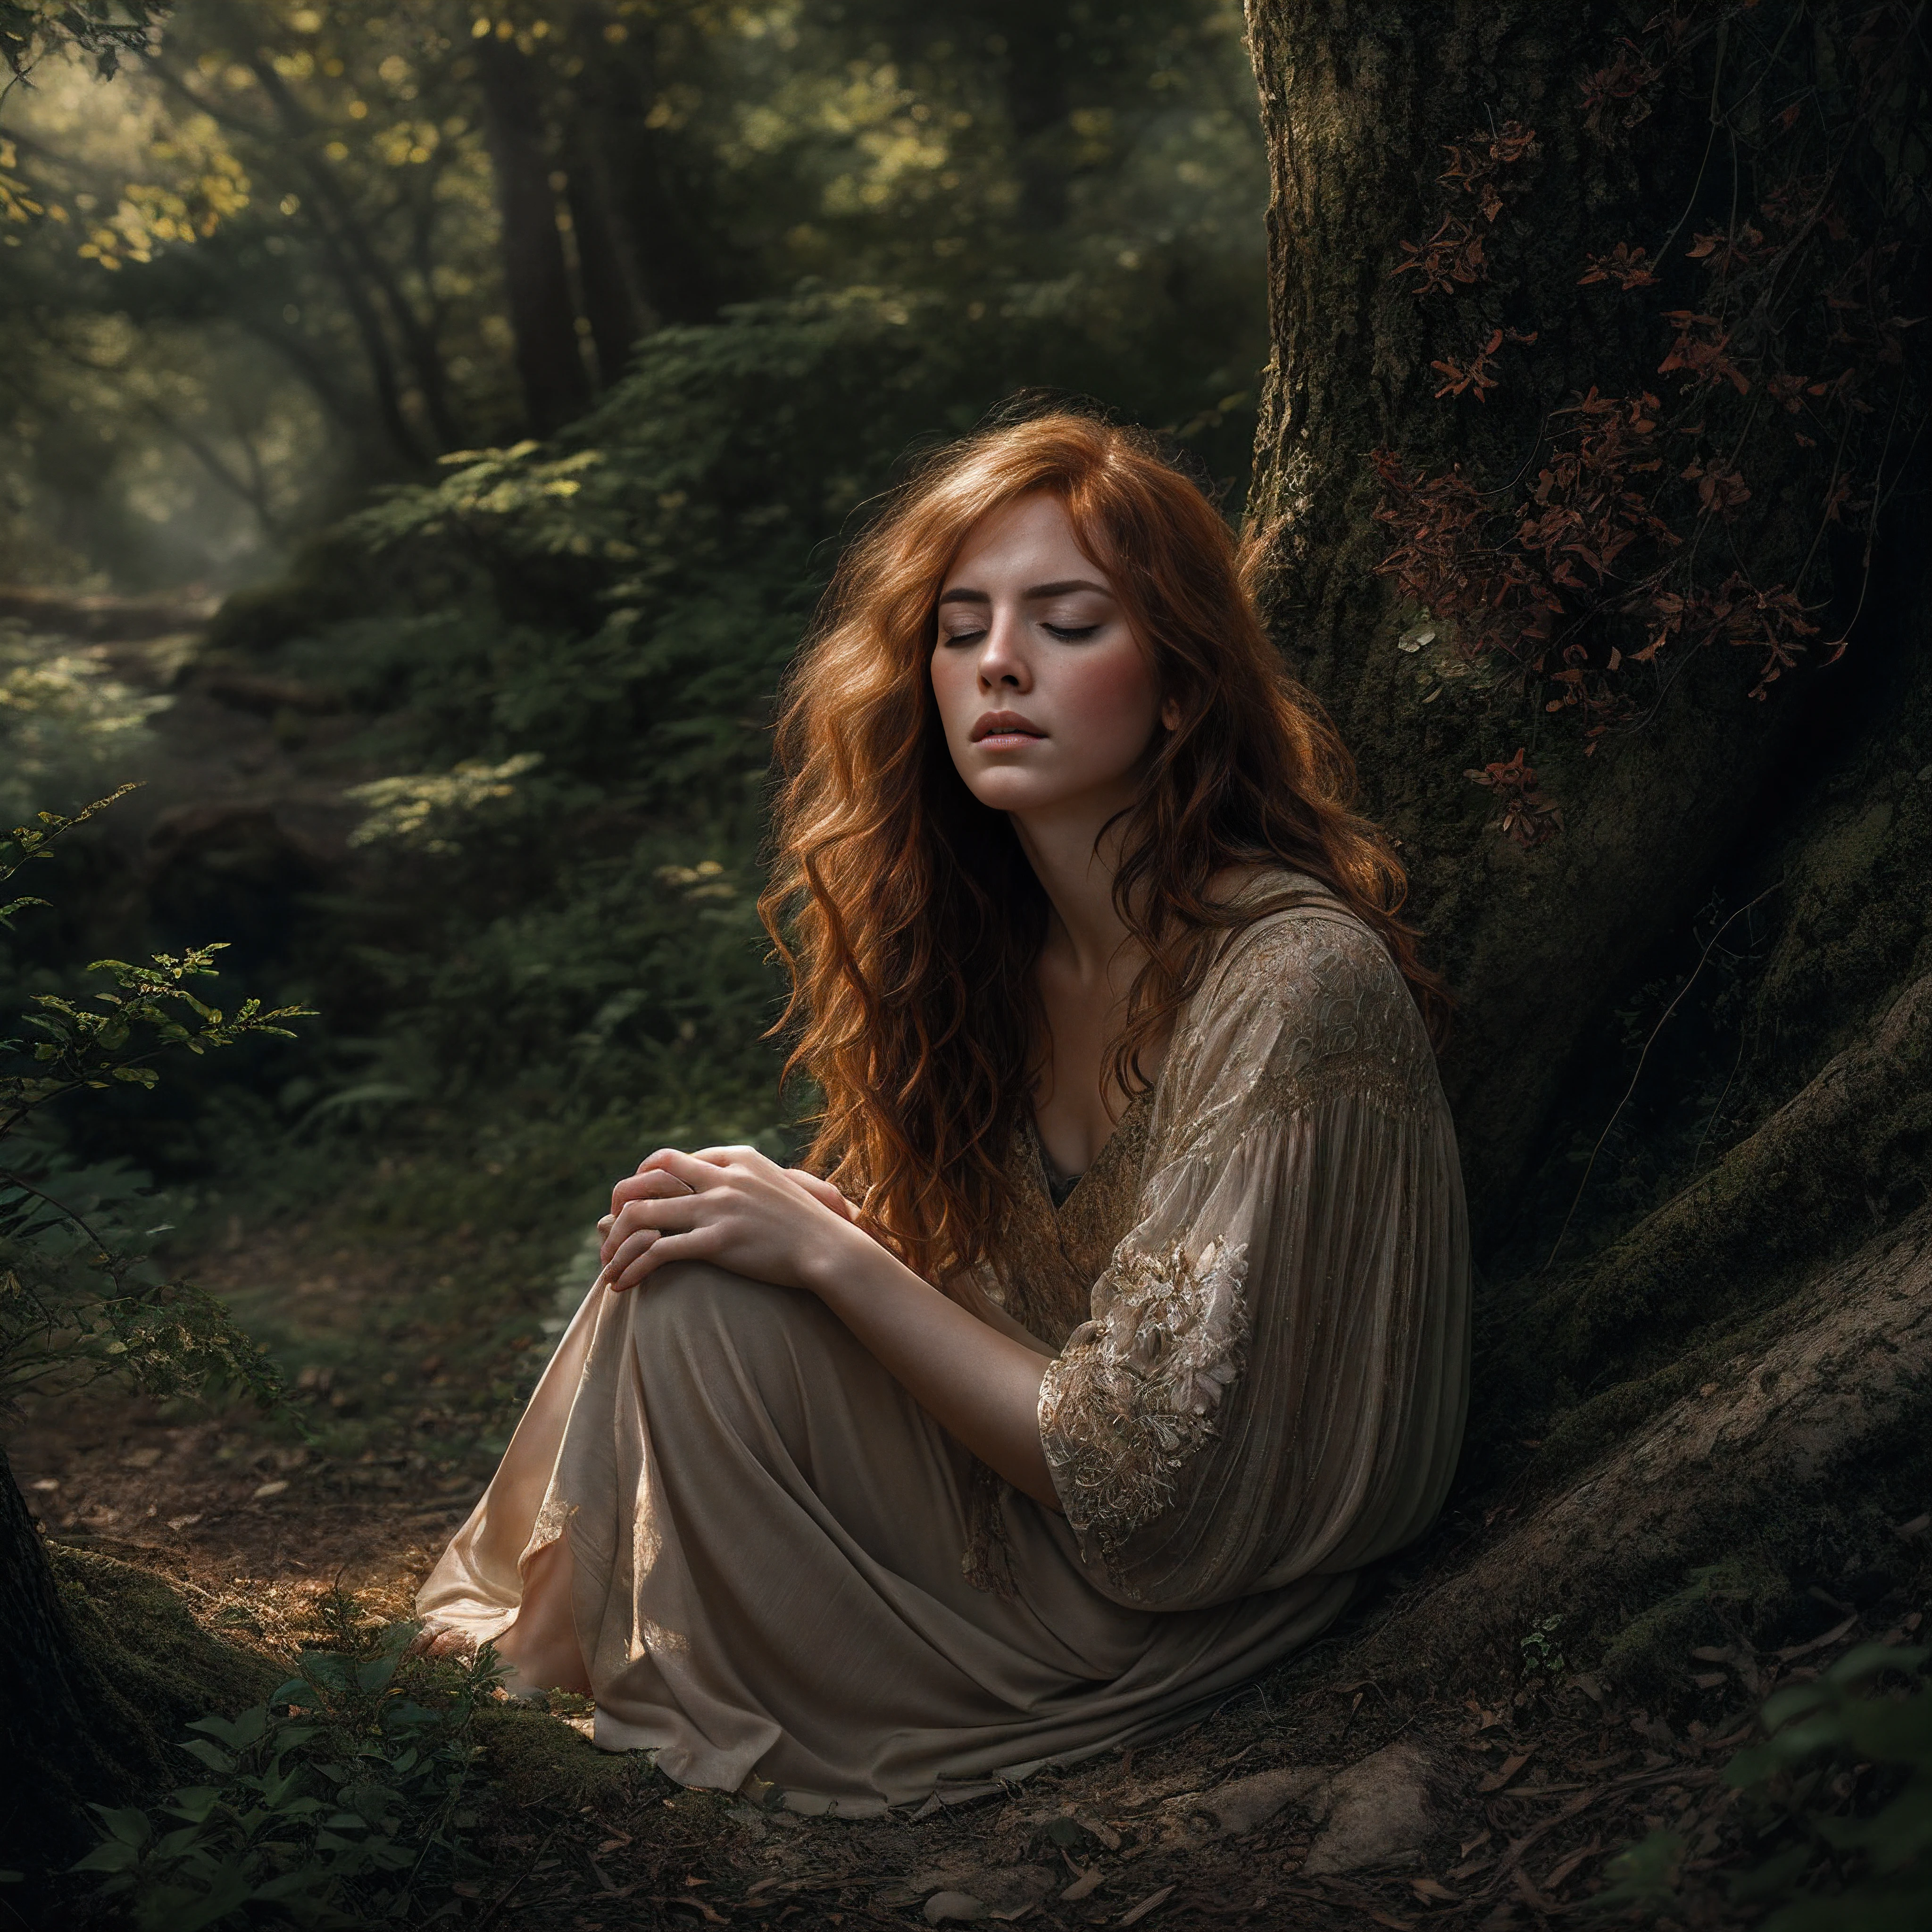 An exquisite portrait depicting a beautiful redheaded woman kneeling peacefully in an ancient forest glen, eyes closed in pensive thought, delicate features caressed by dappled sunlight, flawless skin adorned with endearing freckles, fiery locks softly blowing in the woodland breeze, masterfully composed in the style of a fine art photographic print, tonality rich and atmospherically moody like a cinematic still, intricate textures and film grain integrated seamlessly, overall craftsmanship superbly executed with extraordinary attention to detail, this profound digital painting epitomizes photorealism meets imaginative artistry.